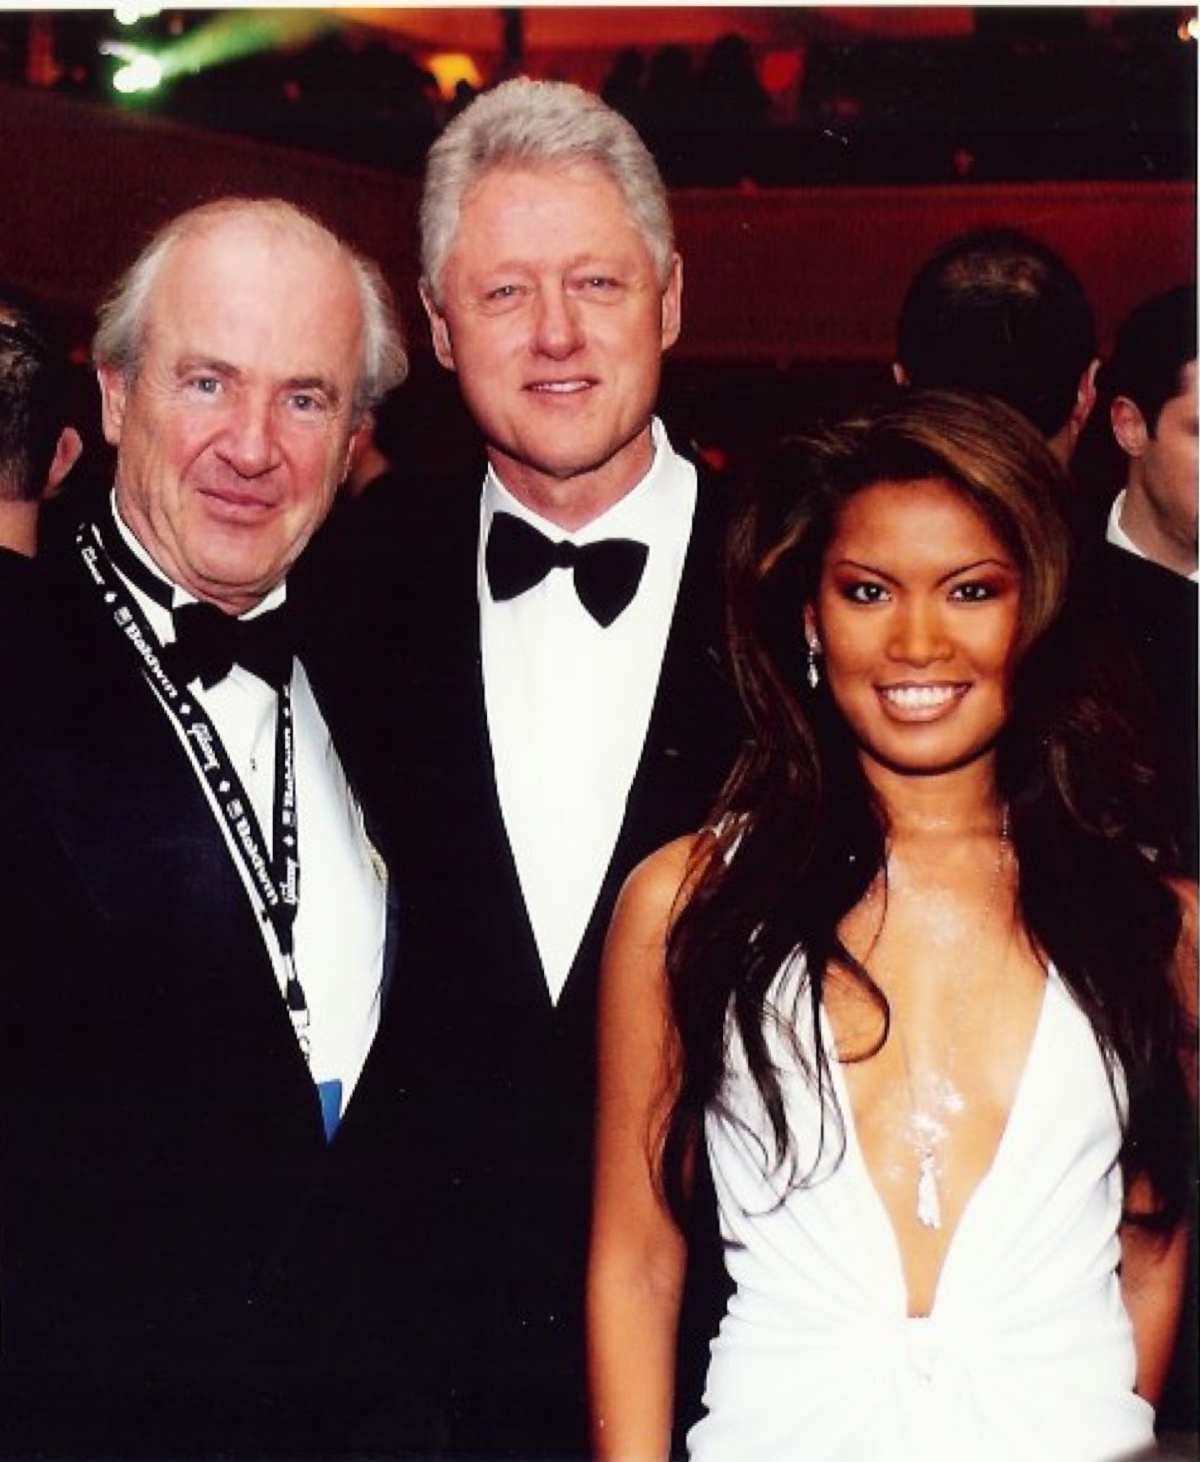 TV personality ZARAH with Dr. Michael Nobel (of the Nobel family) and former Pres. Bill Clinton.